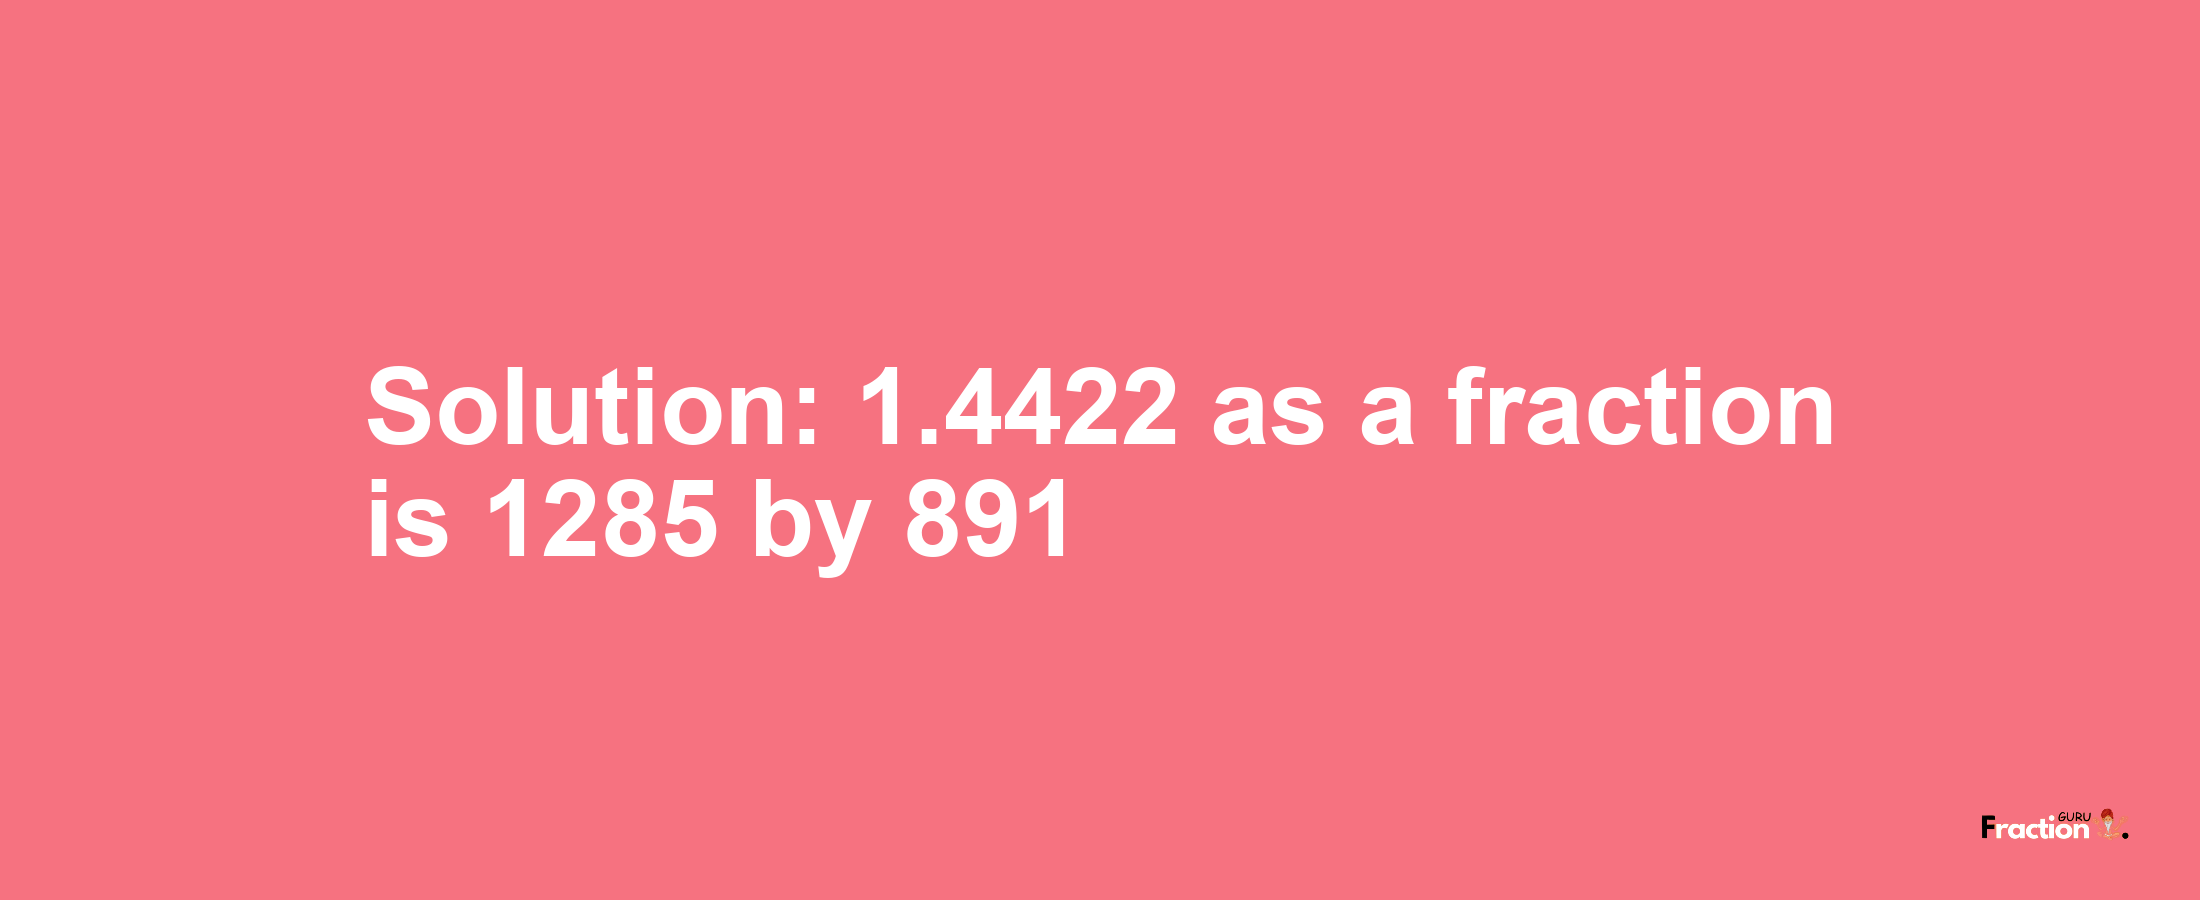 Solution:1.4422 as a fraction is 1285/891